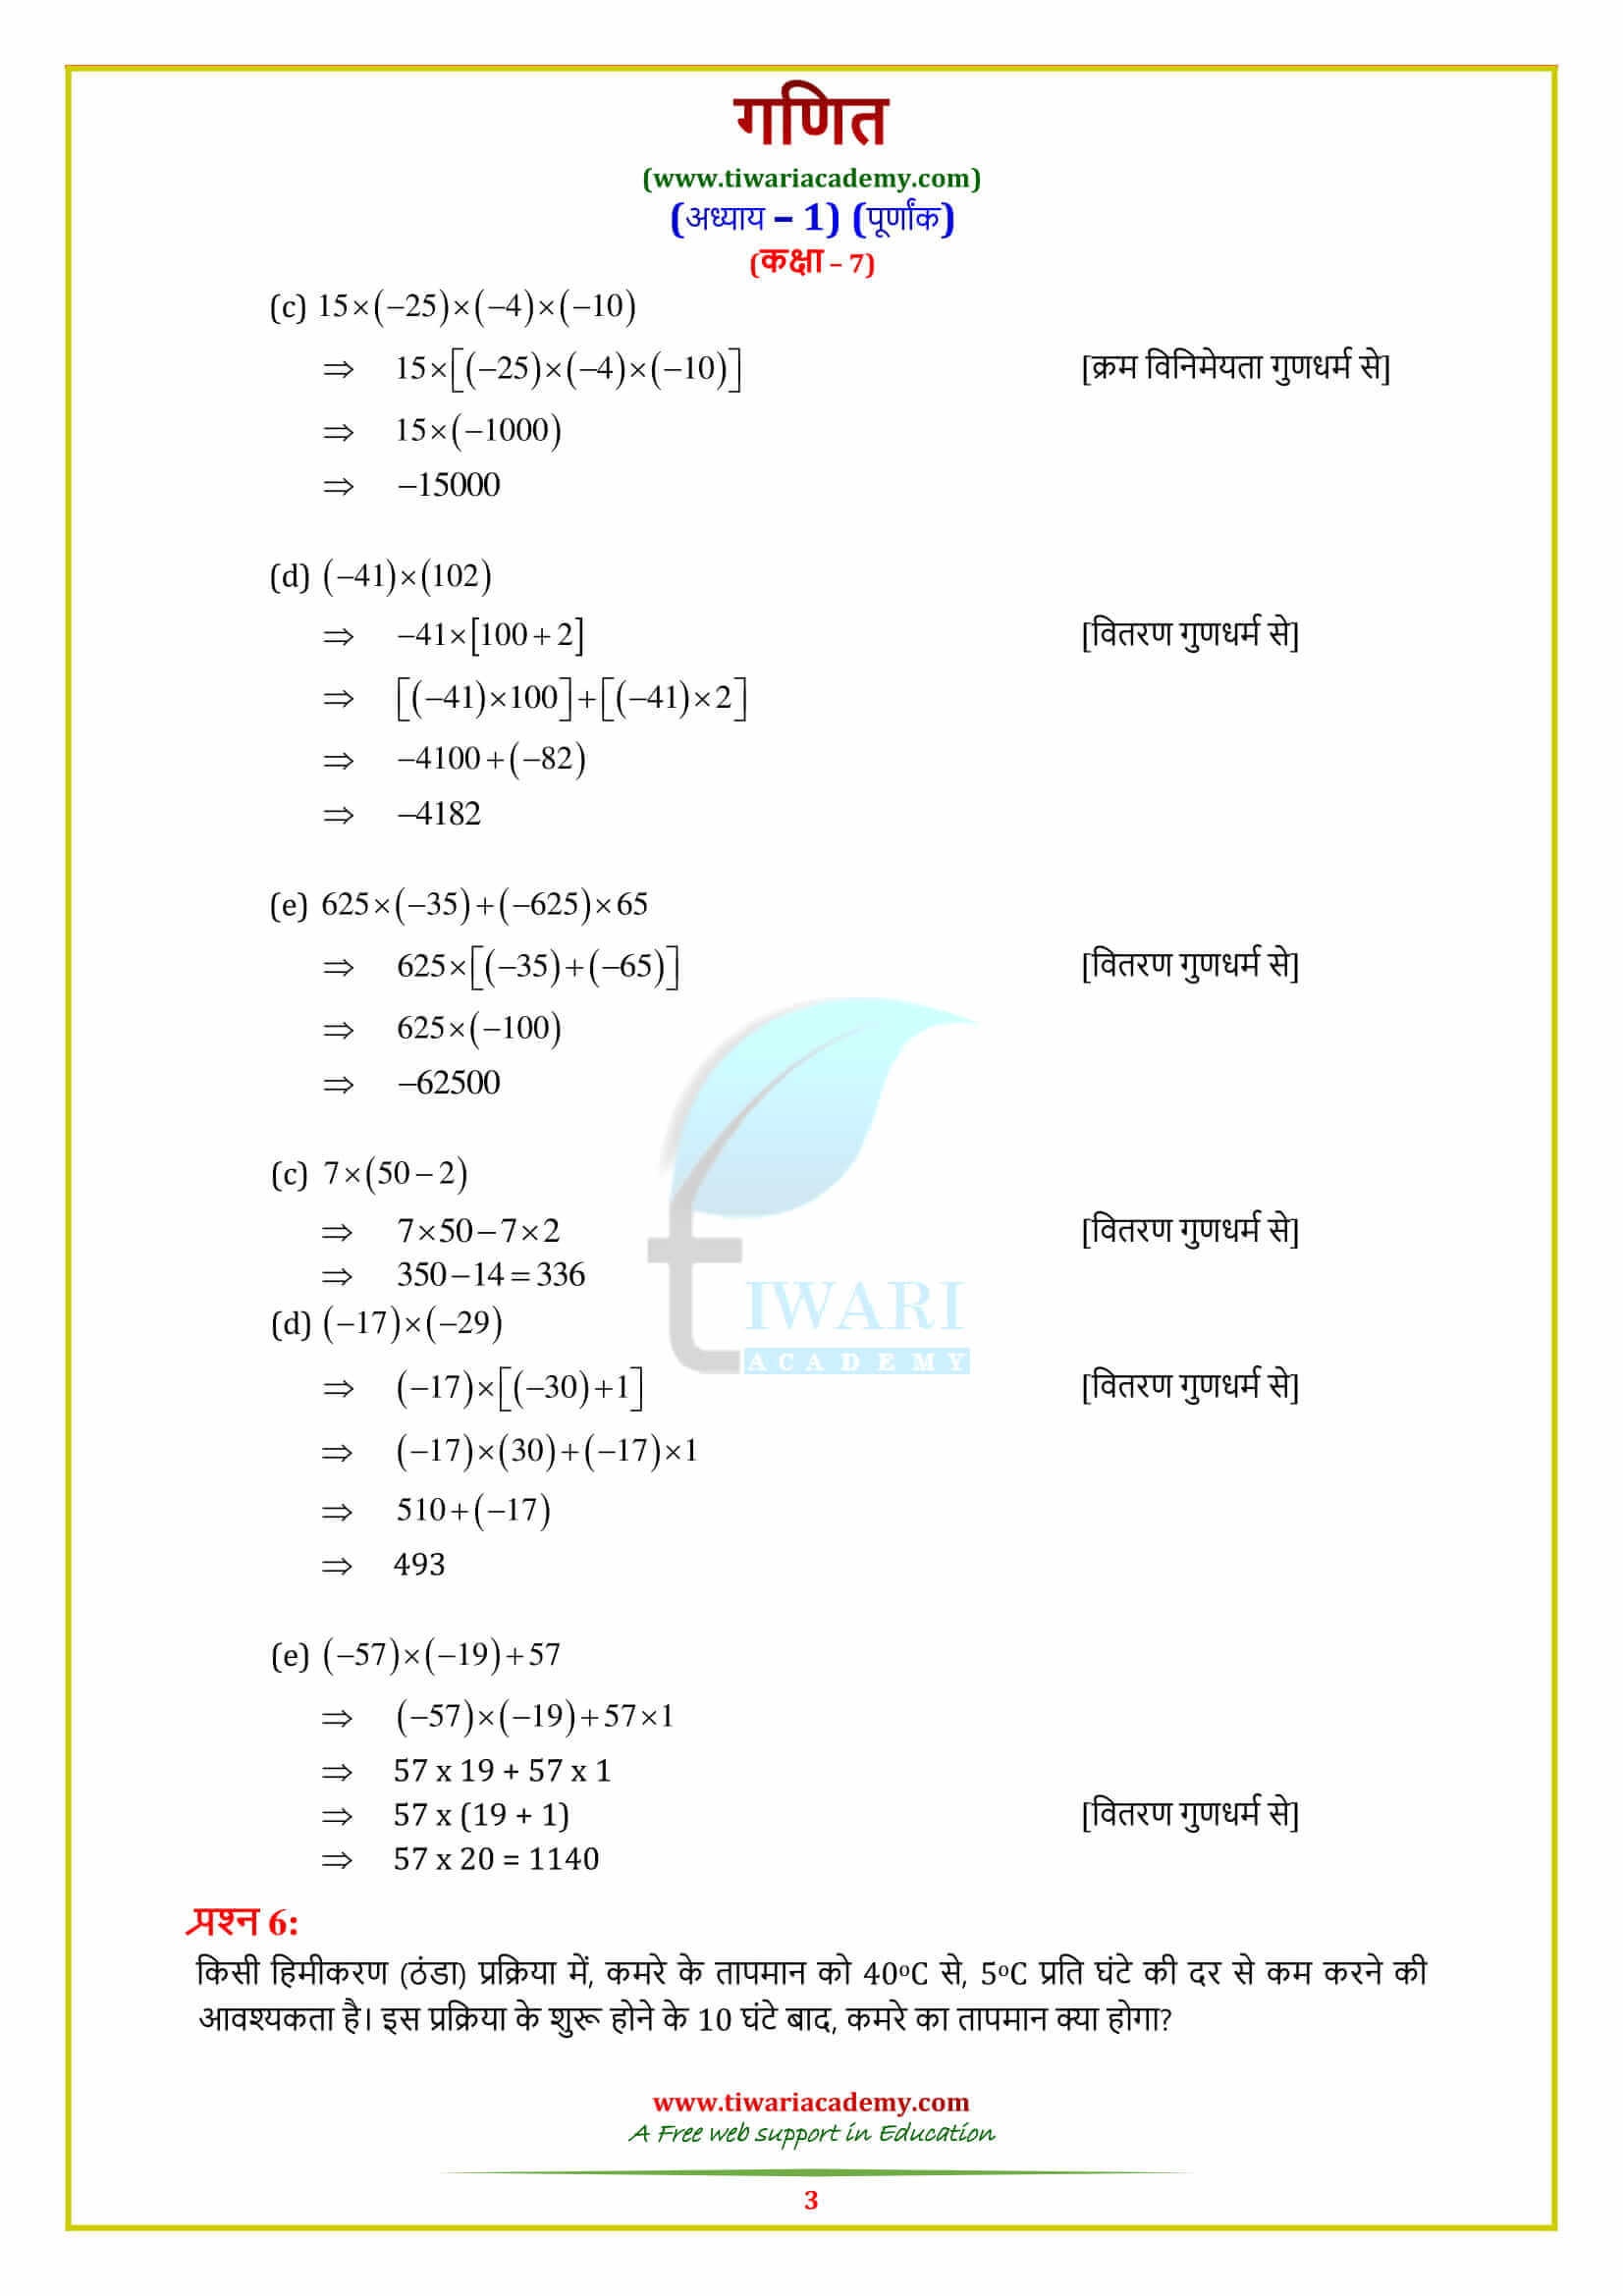 7 Maths Exercise 1.3 solutions in pdf